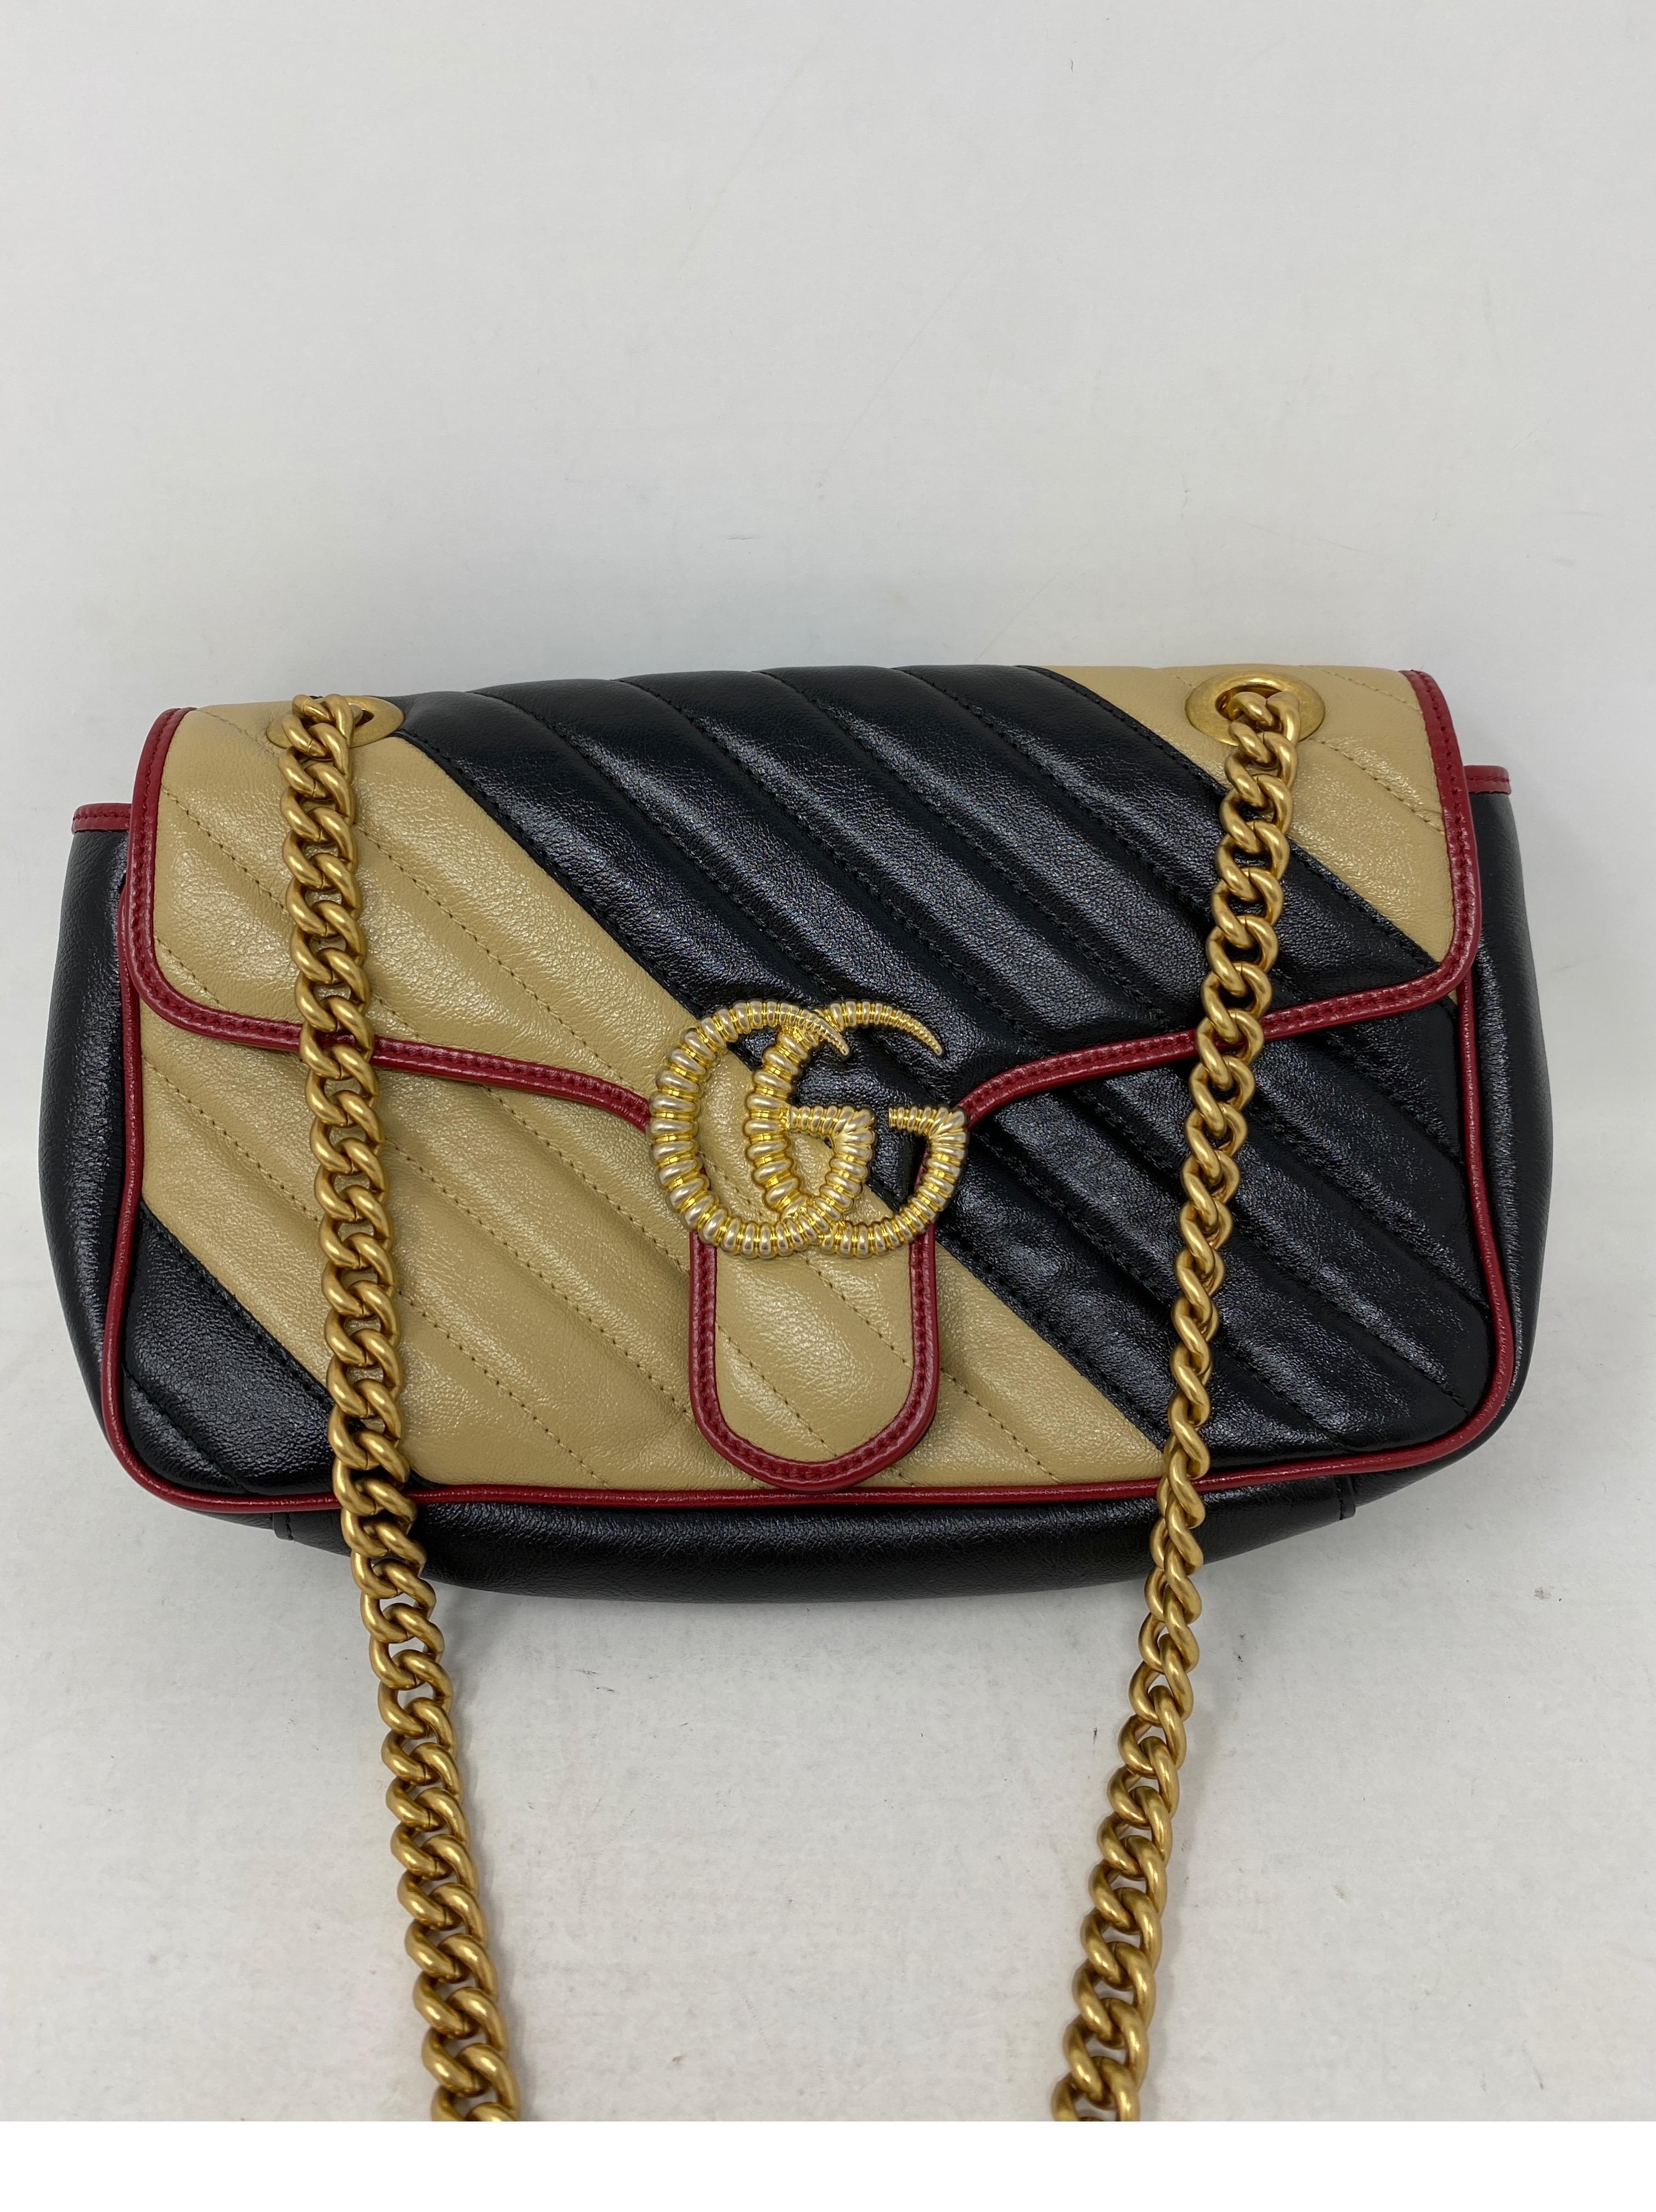 Gucci Red and Black Marmont Bag. Beautiful Gucci bag in excellent condition. Can be worn as a crossbody or doubled as a shoulder bag. Guaranteed authentic. 